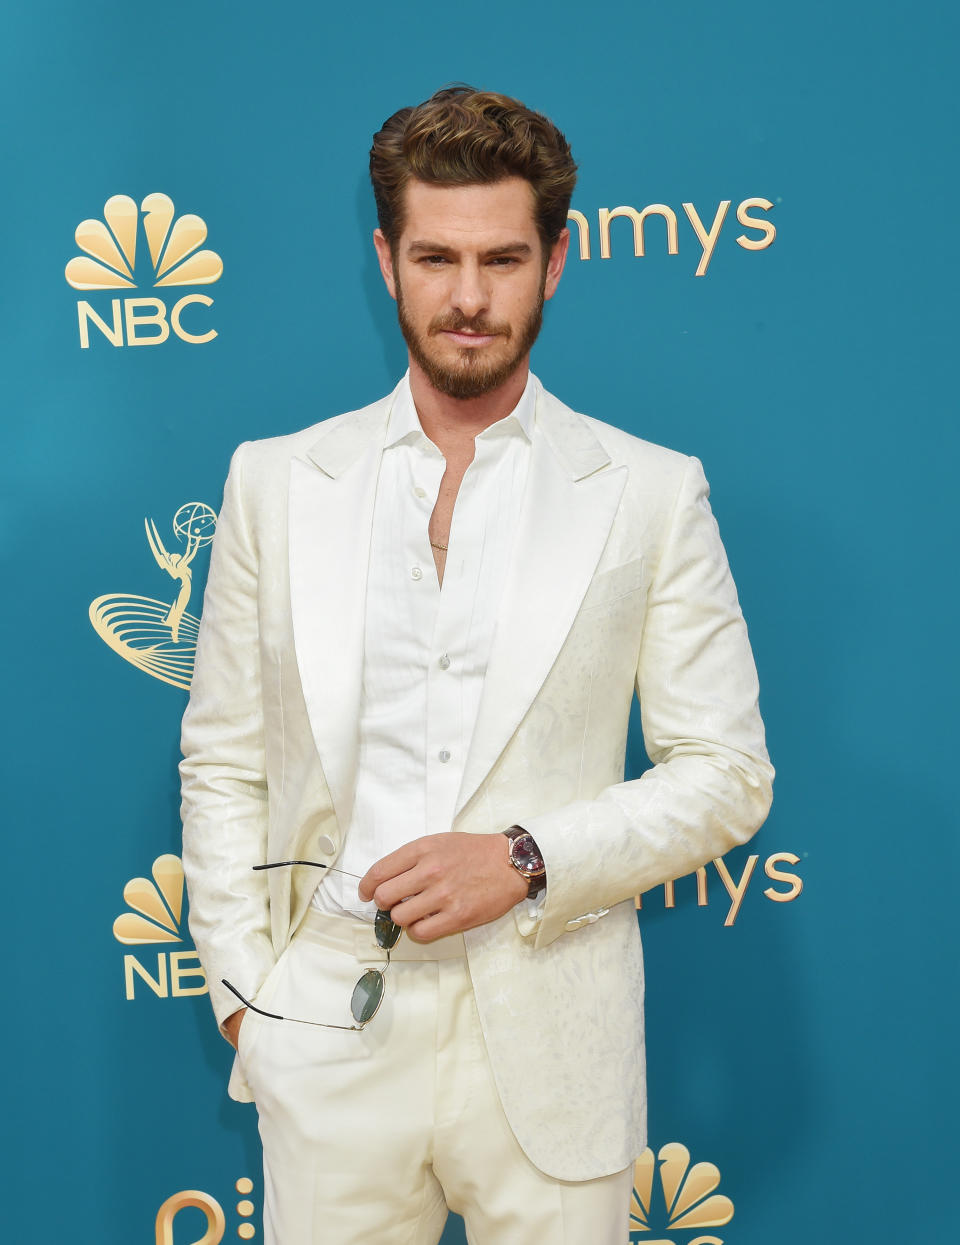 Andrew in a light-colored suit and holding sunglasses